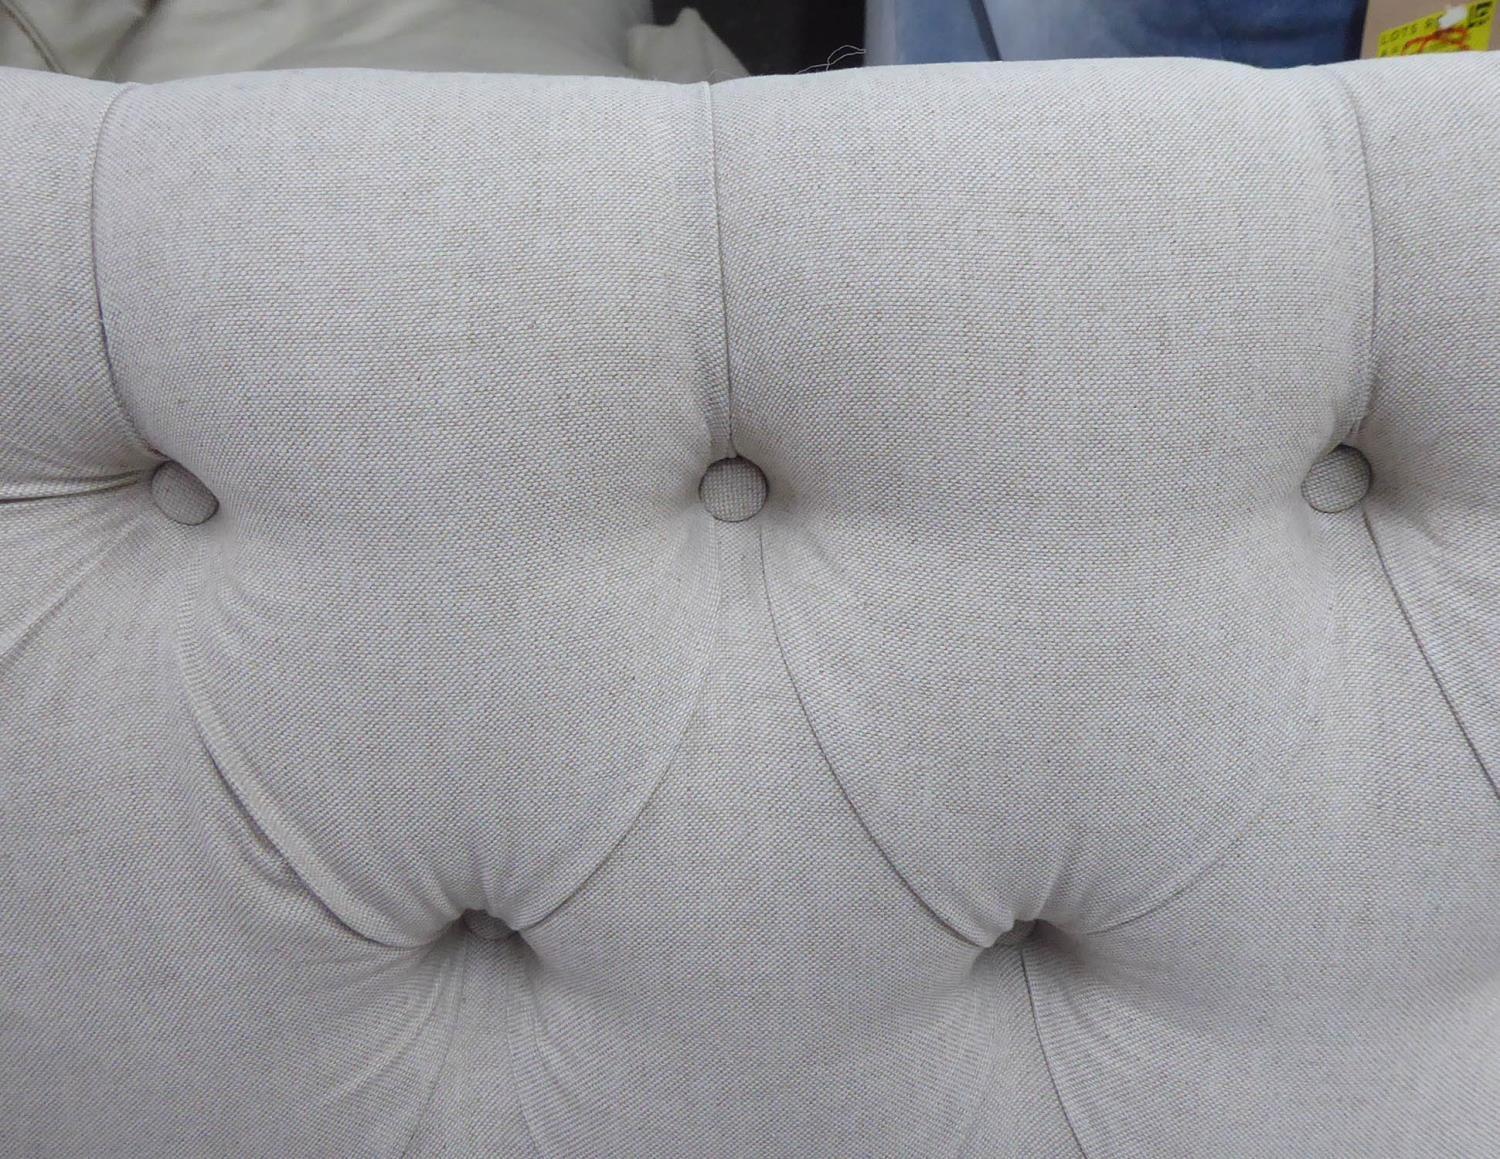 SOFA, contemporary buttoned back finish, neutral upholstery, 131cm W. - Image 3 of 5